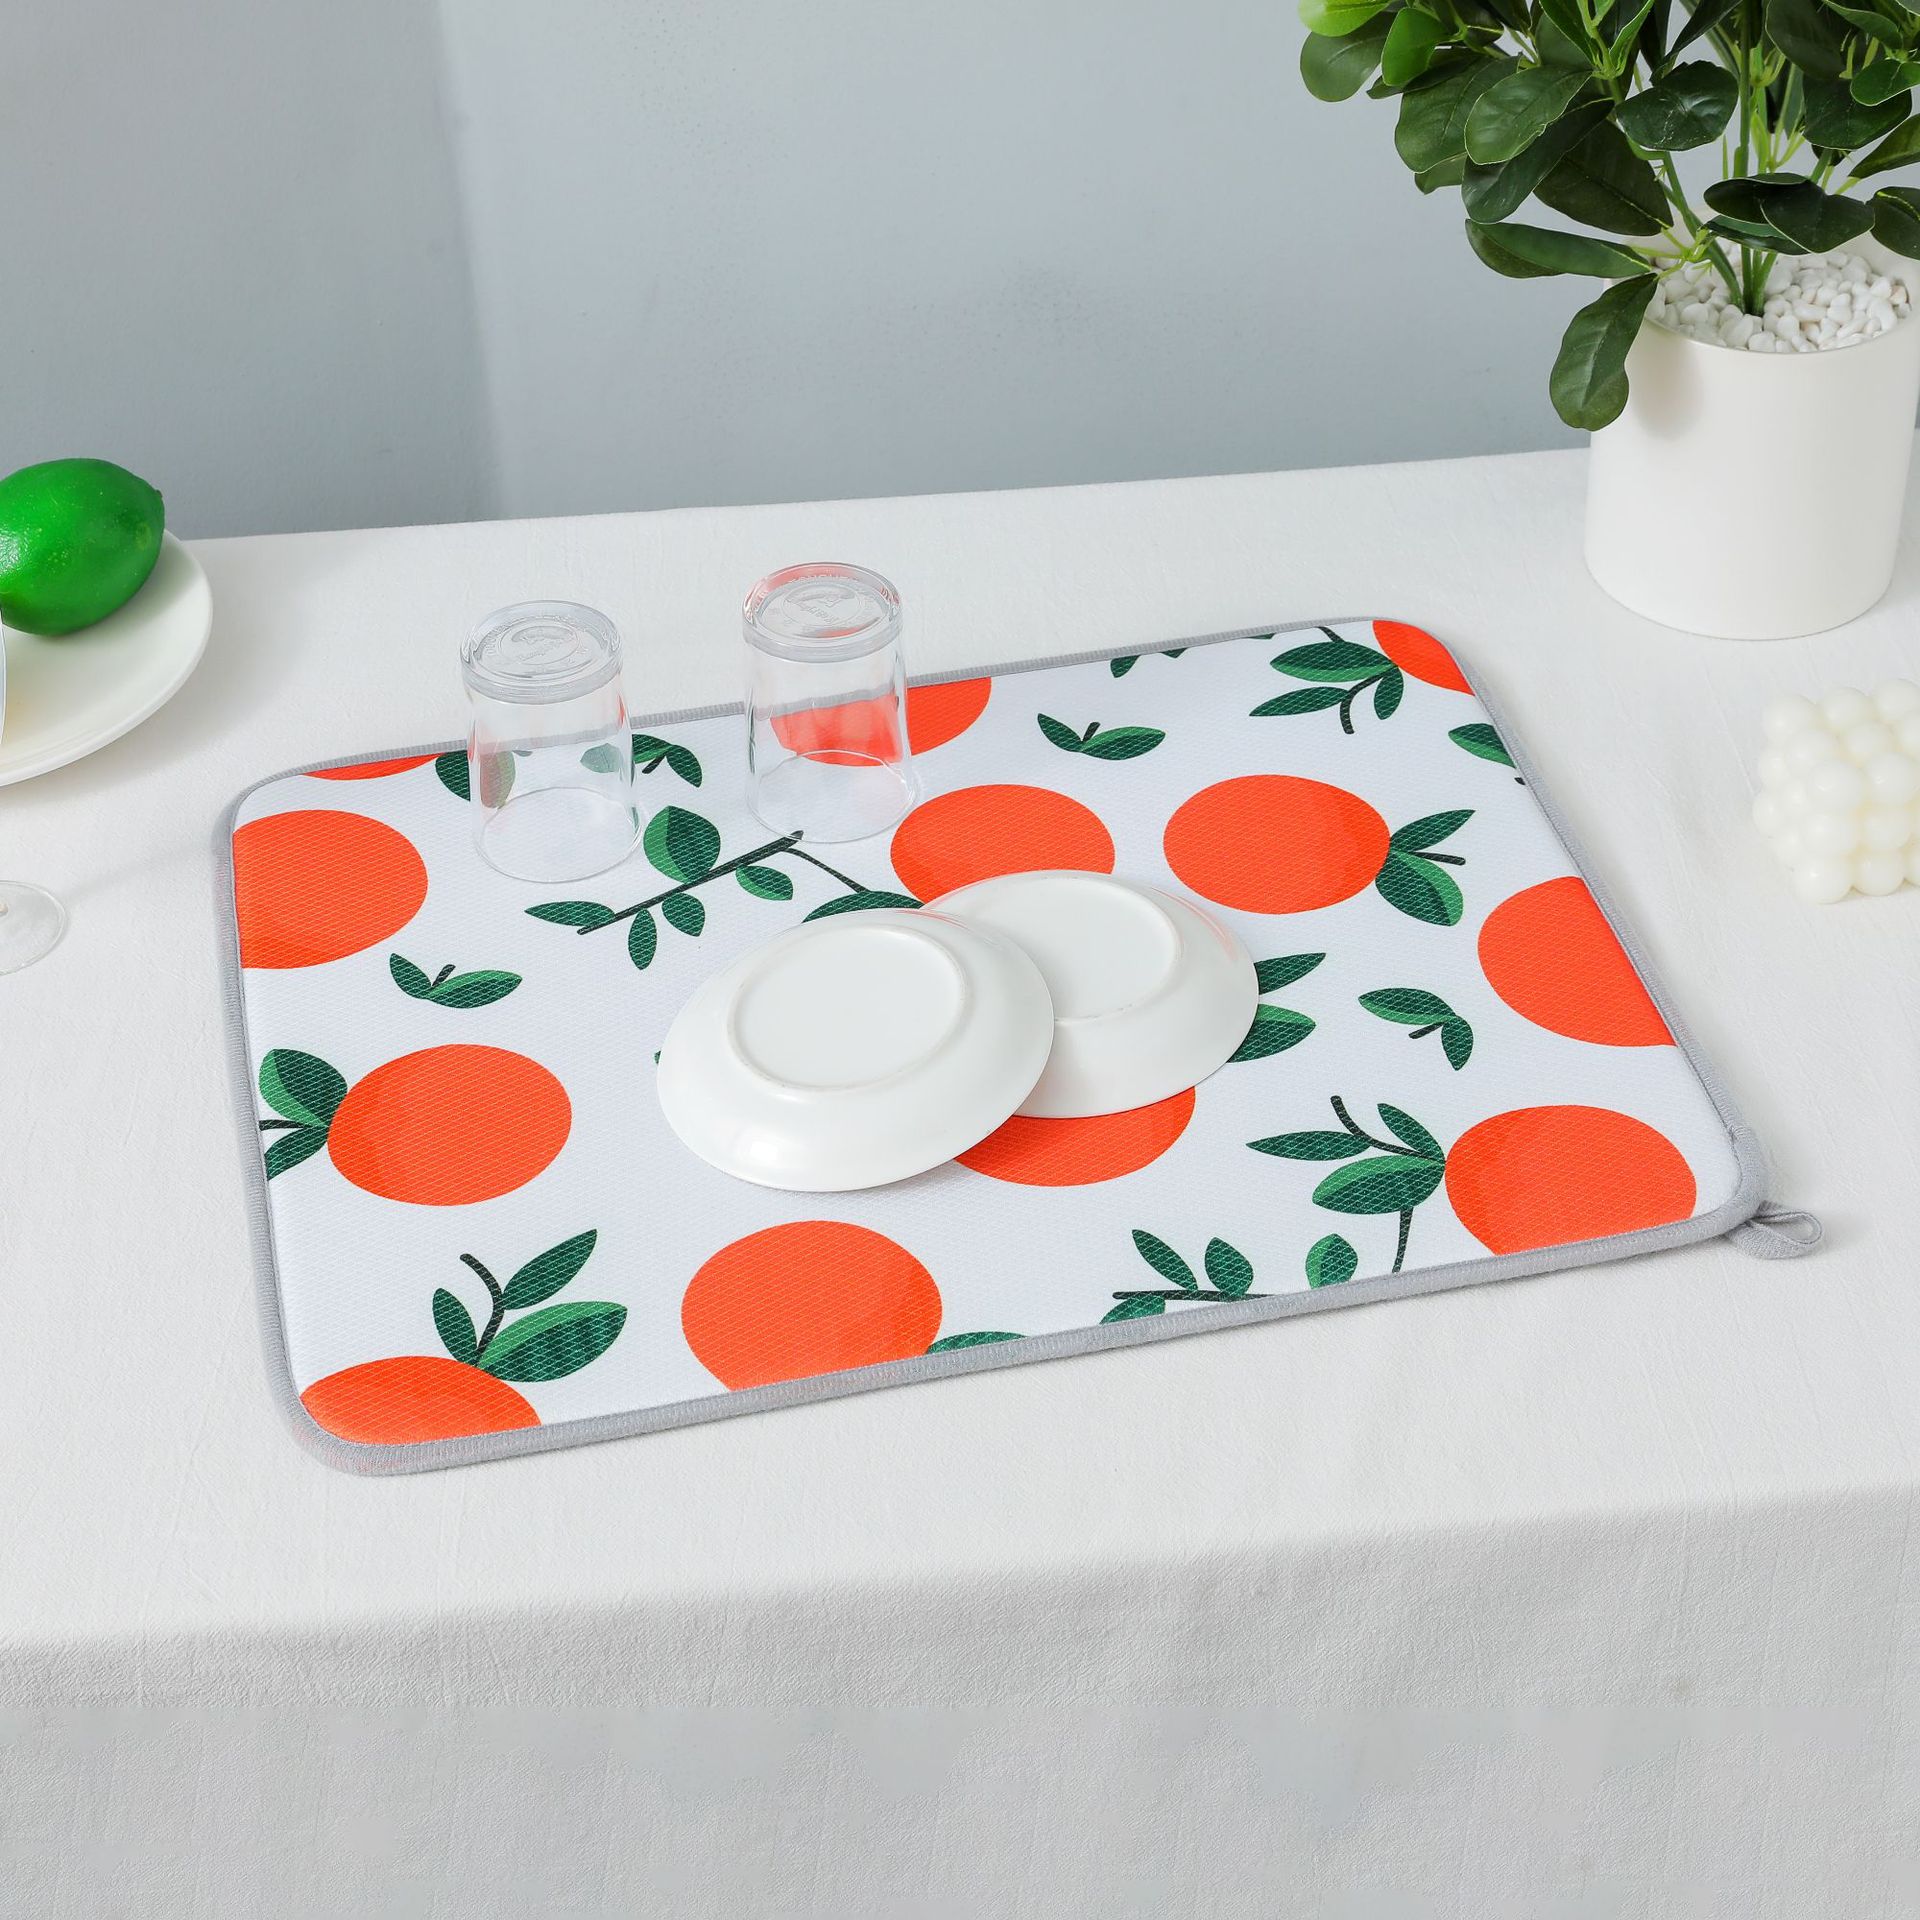 Cross-Border Microfiber Digital Printing Dry Material Pad Water-Absorbing Quick-Drying Kitchen Cabinet Pad Saucers Tableware Bowl and Plates Water Draining Pad